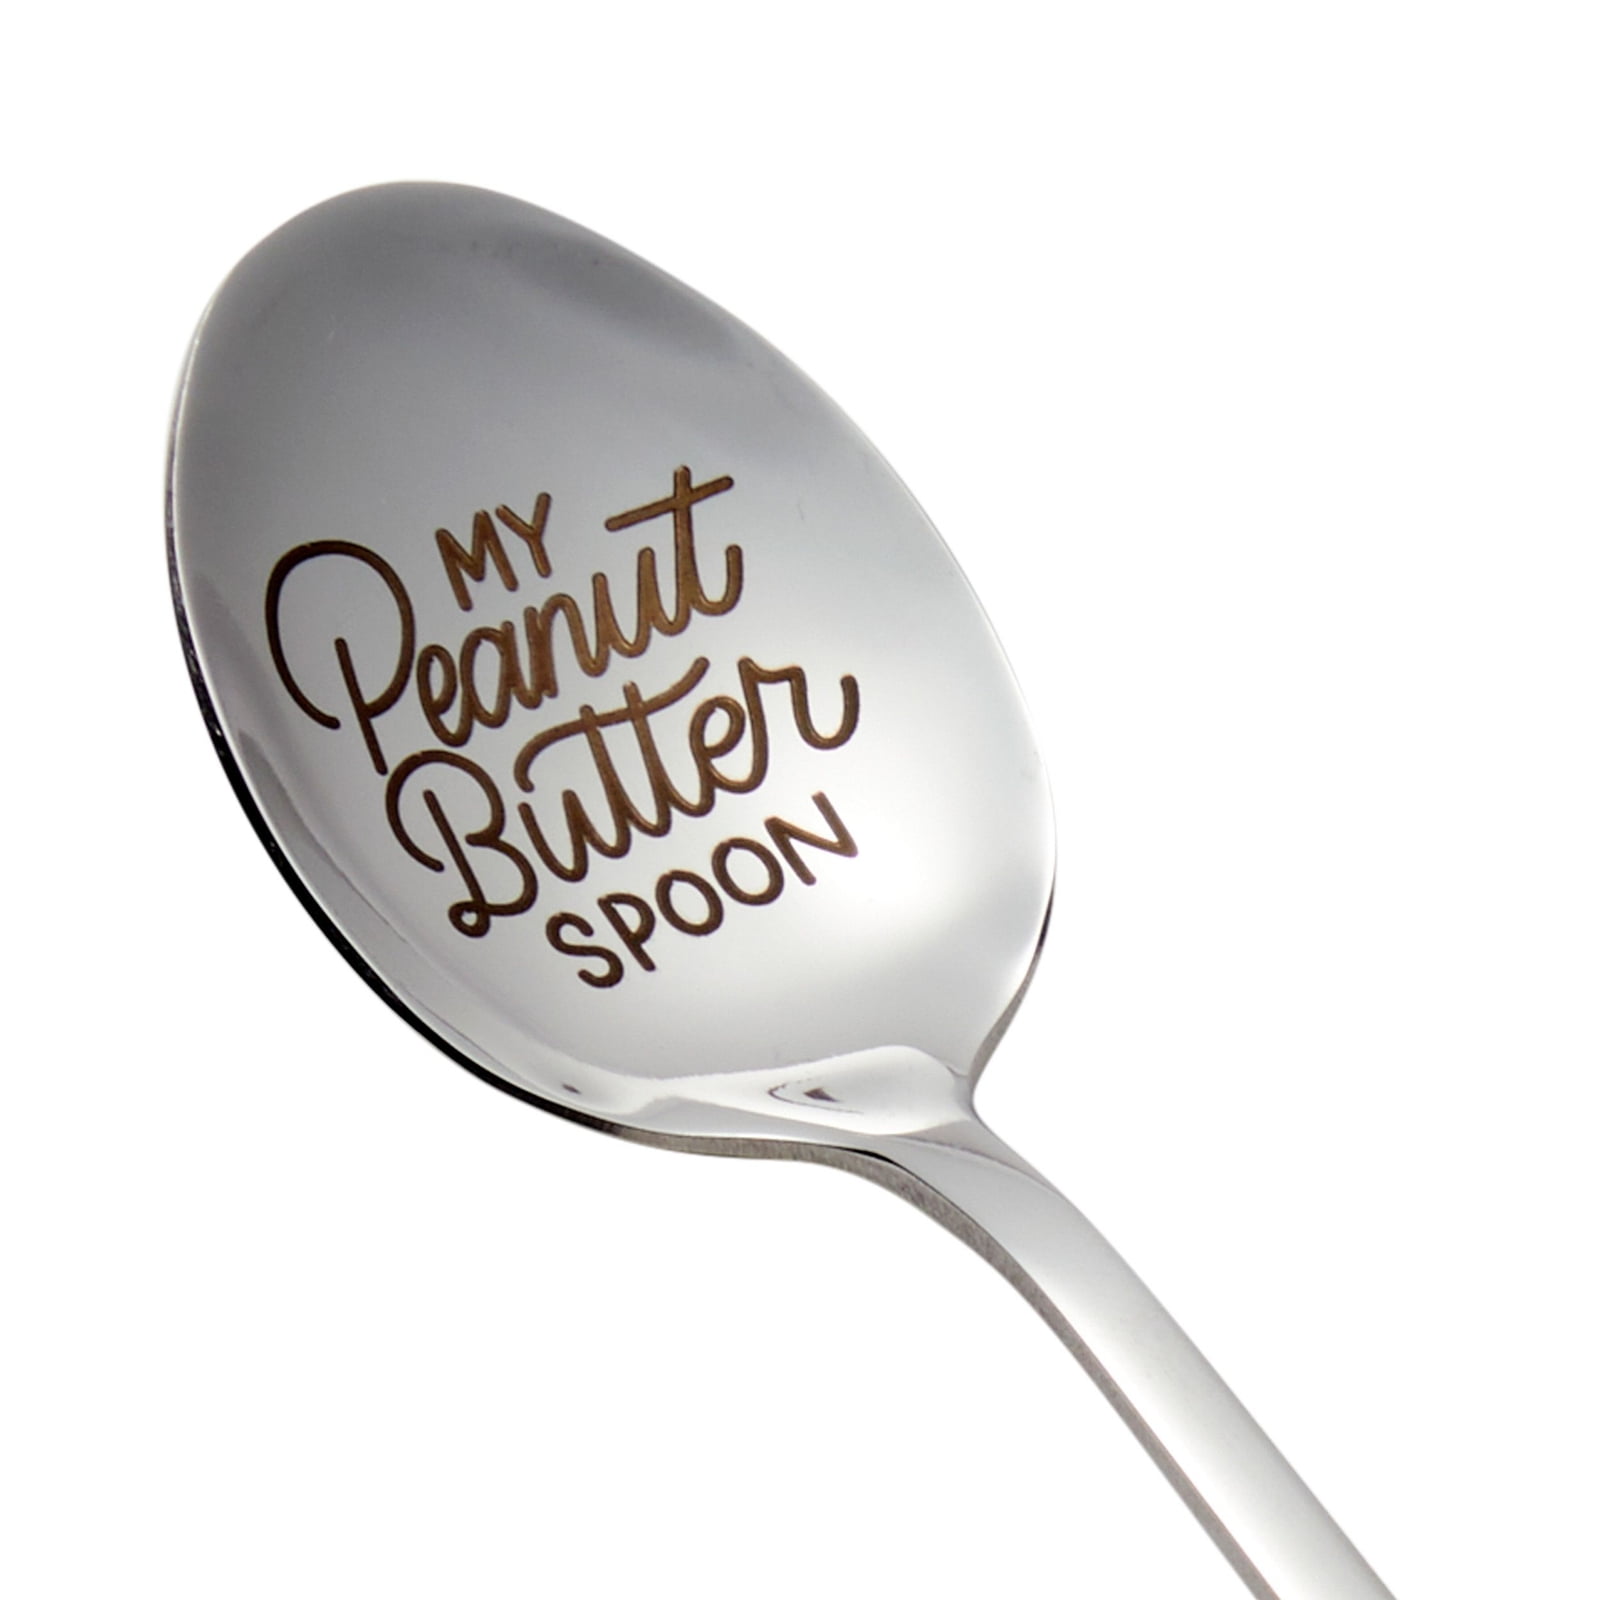 BE HAPPY  Inspirational Humorous quote art PERSONALISED SPOON any name printing 